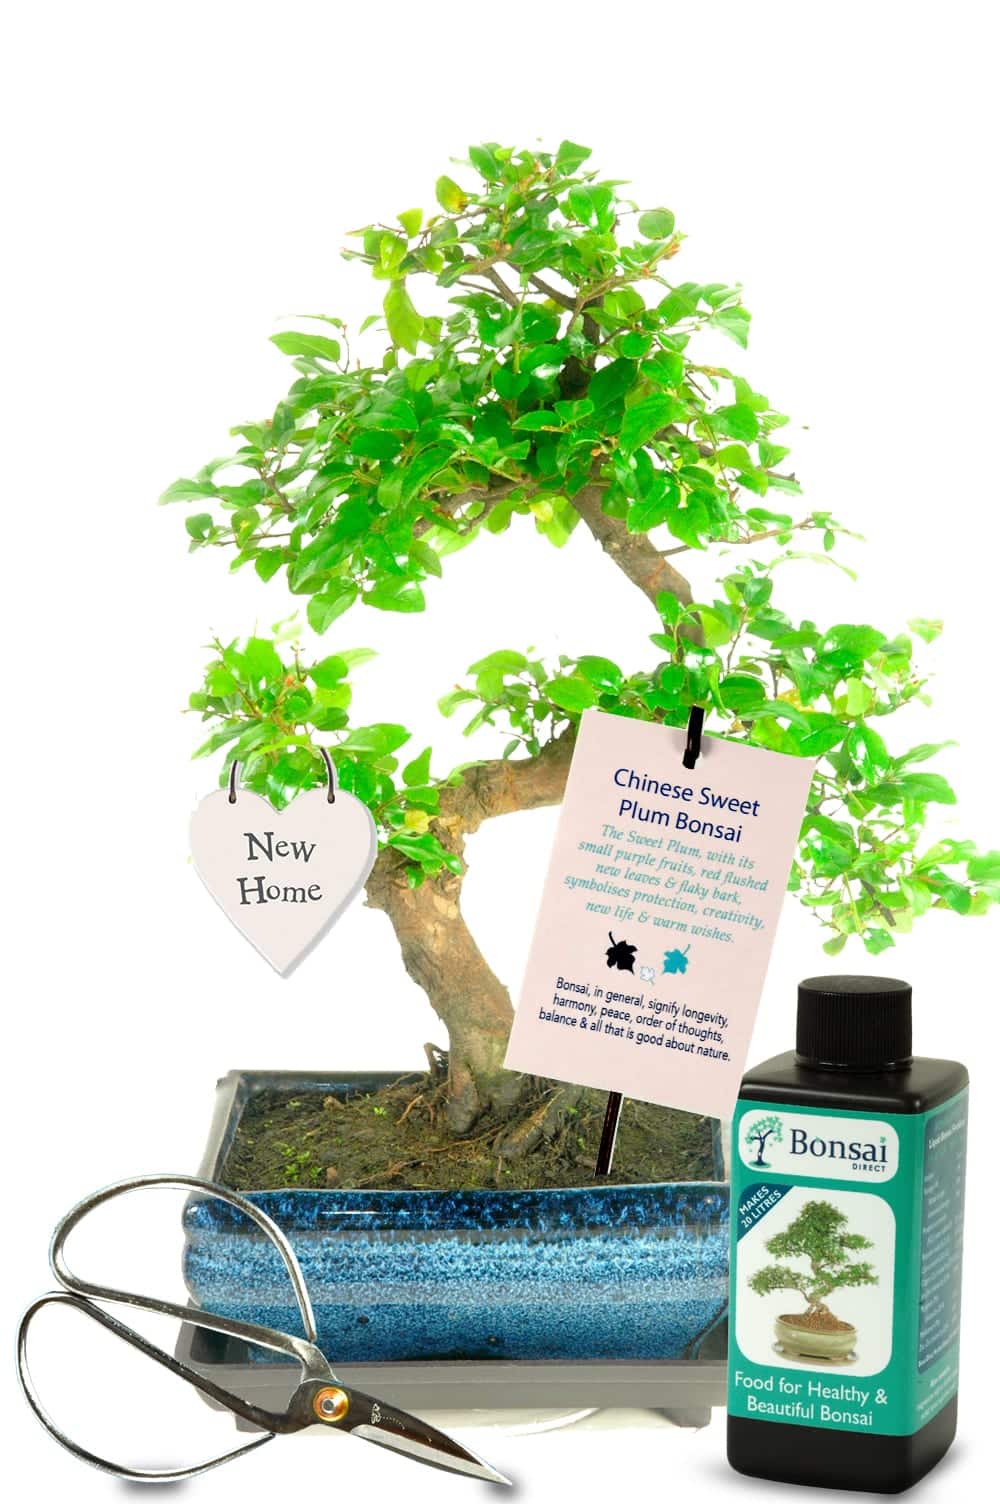 New Home House Warming Gifts That Grow Bonsai Trees For Sale Uk